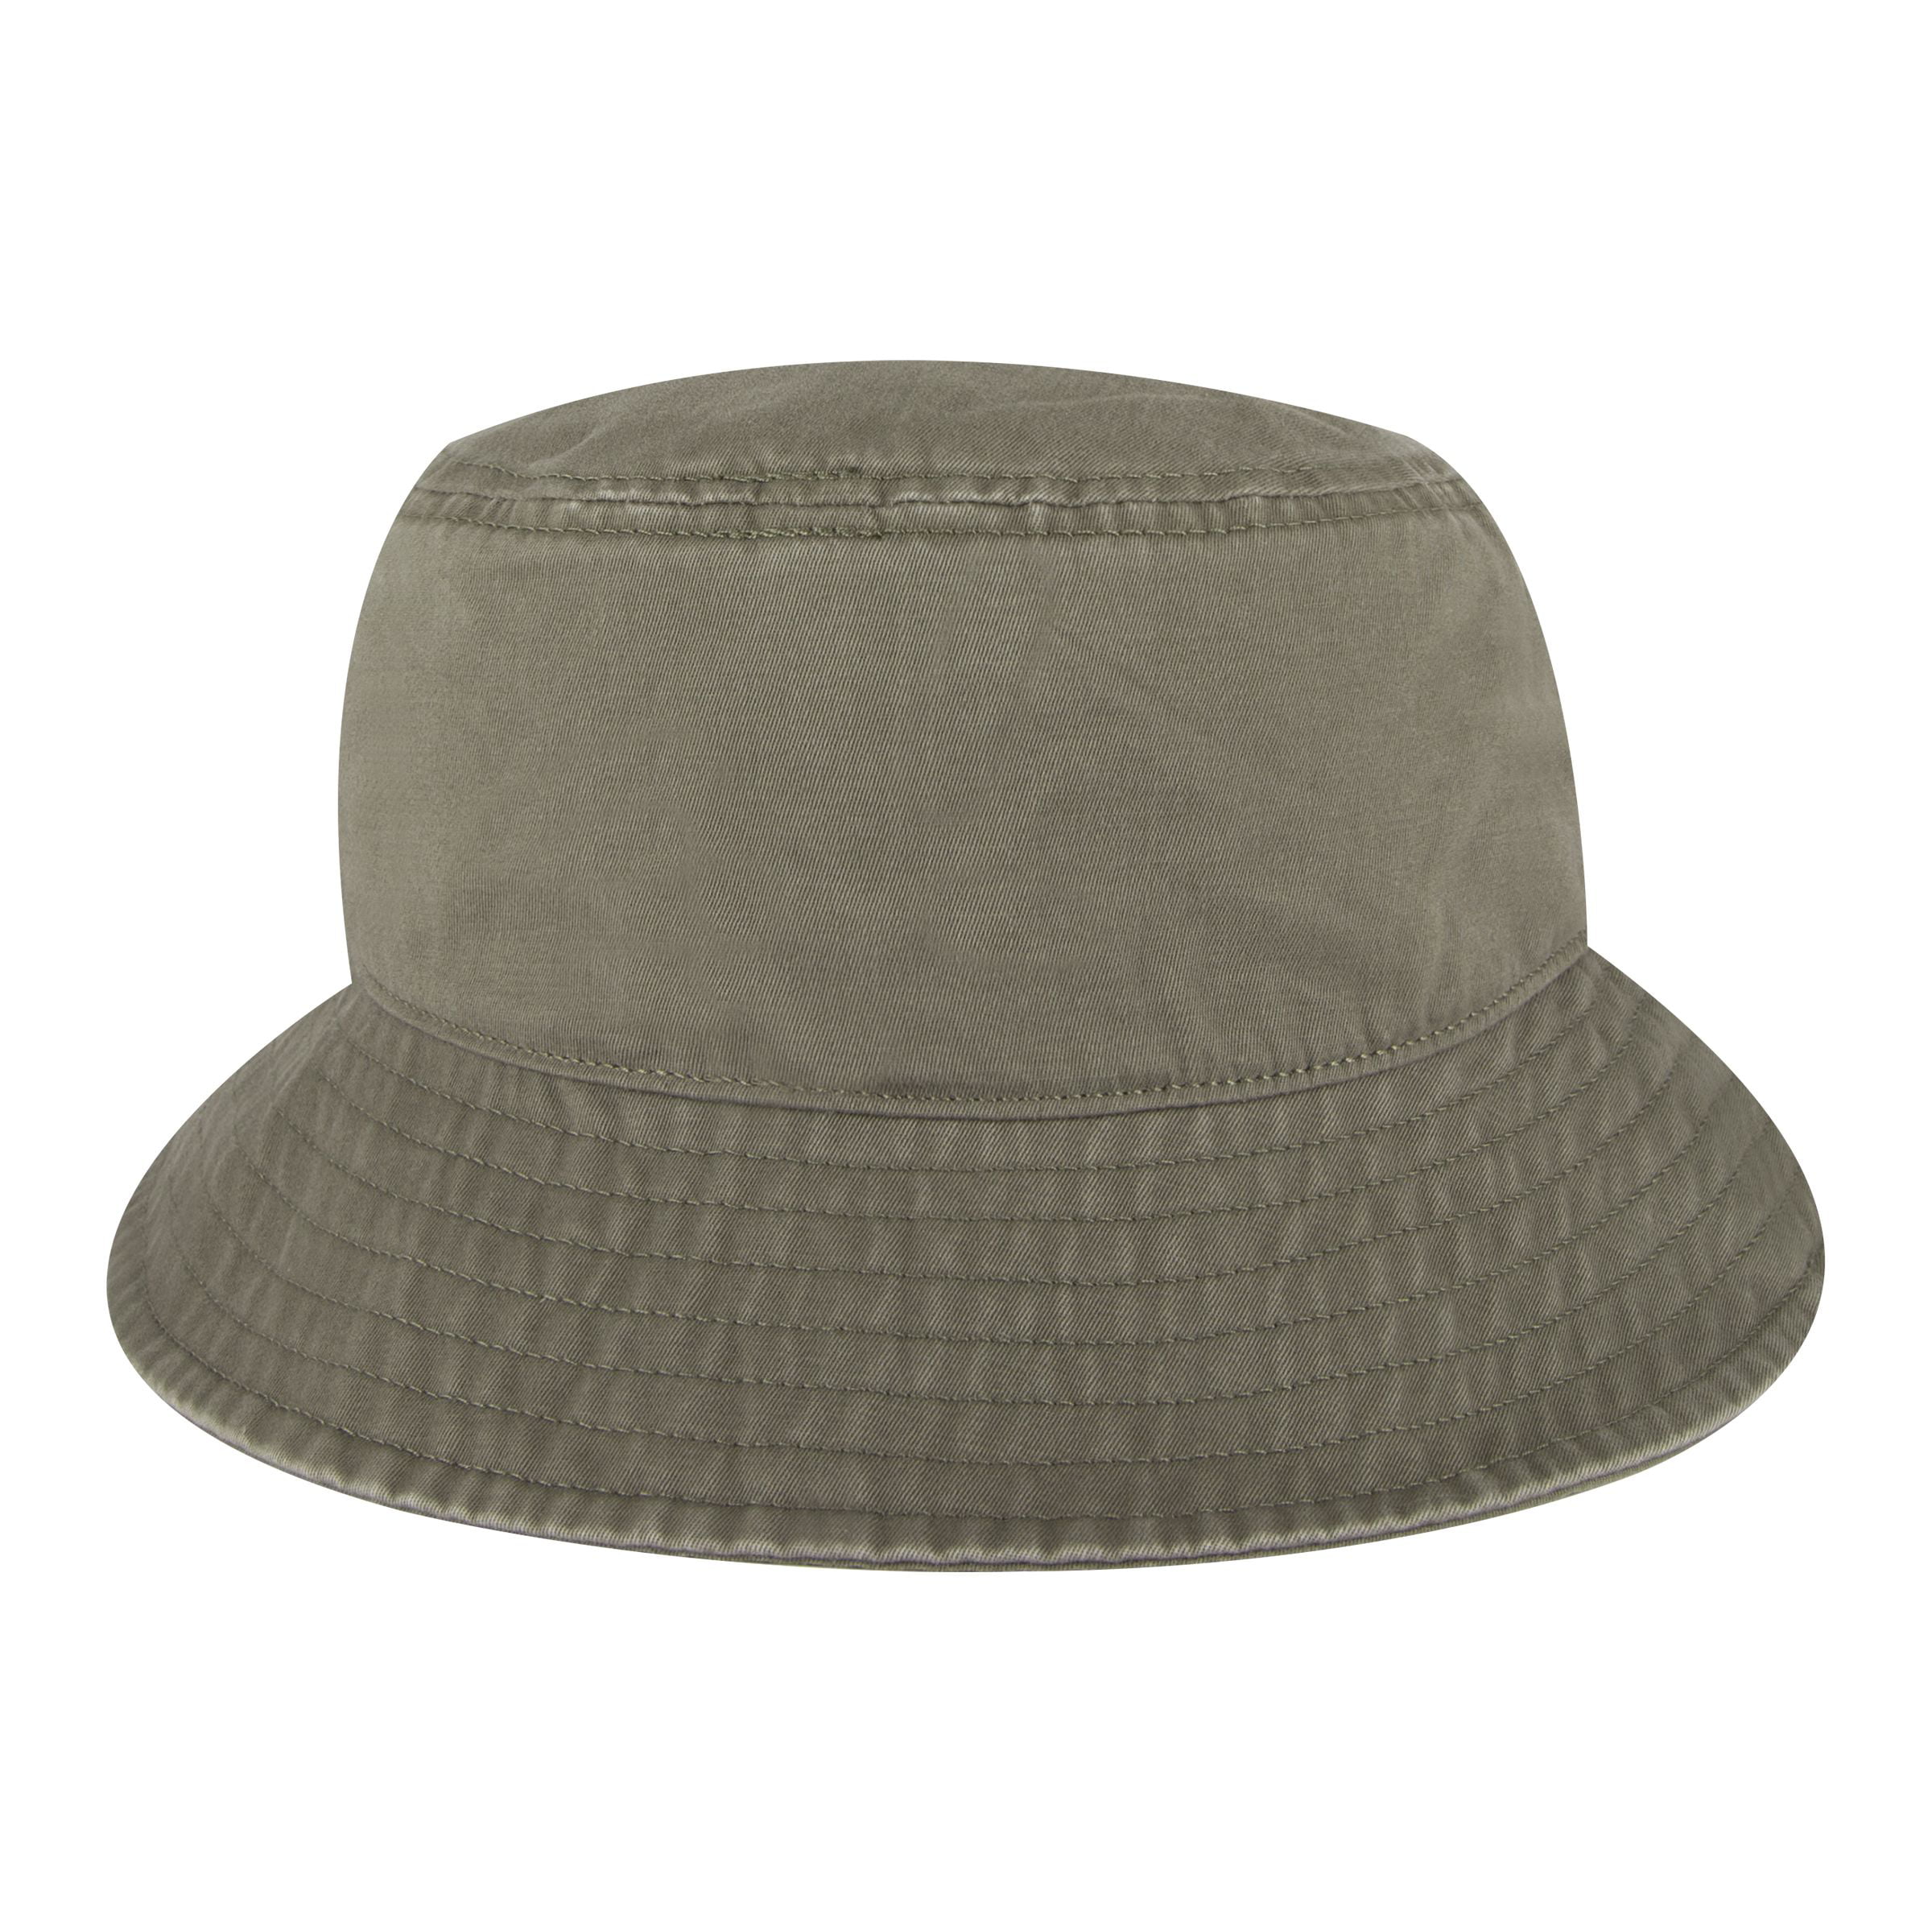 Boys Stone Bucket Hat from Primark age 4-7 